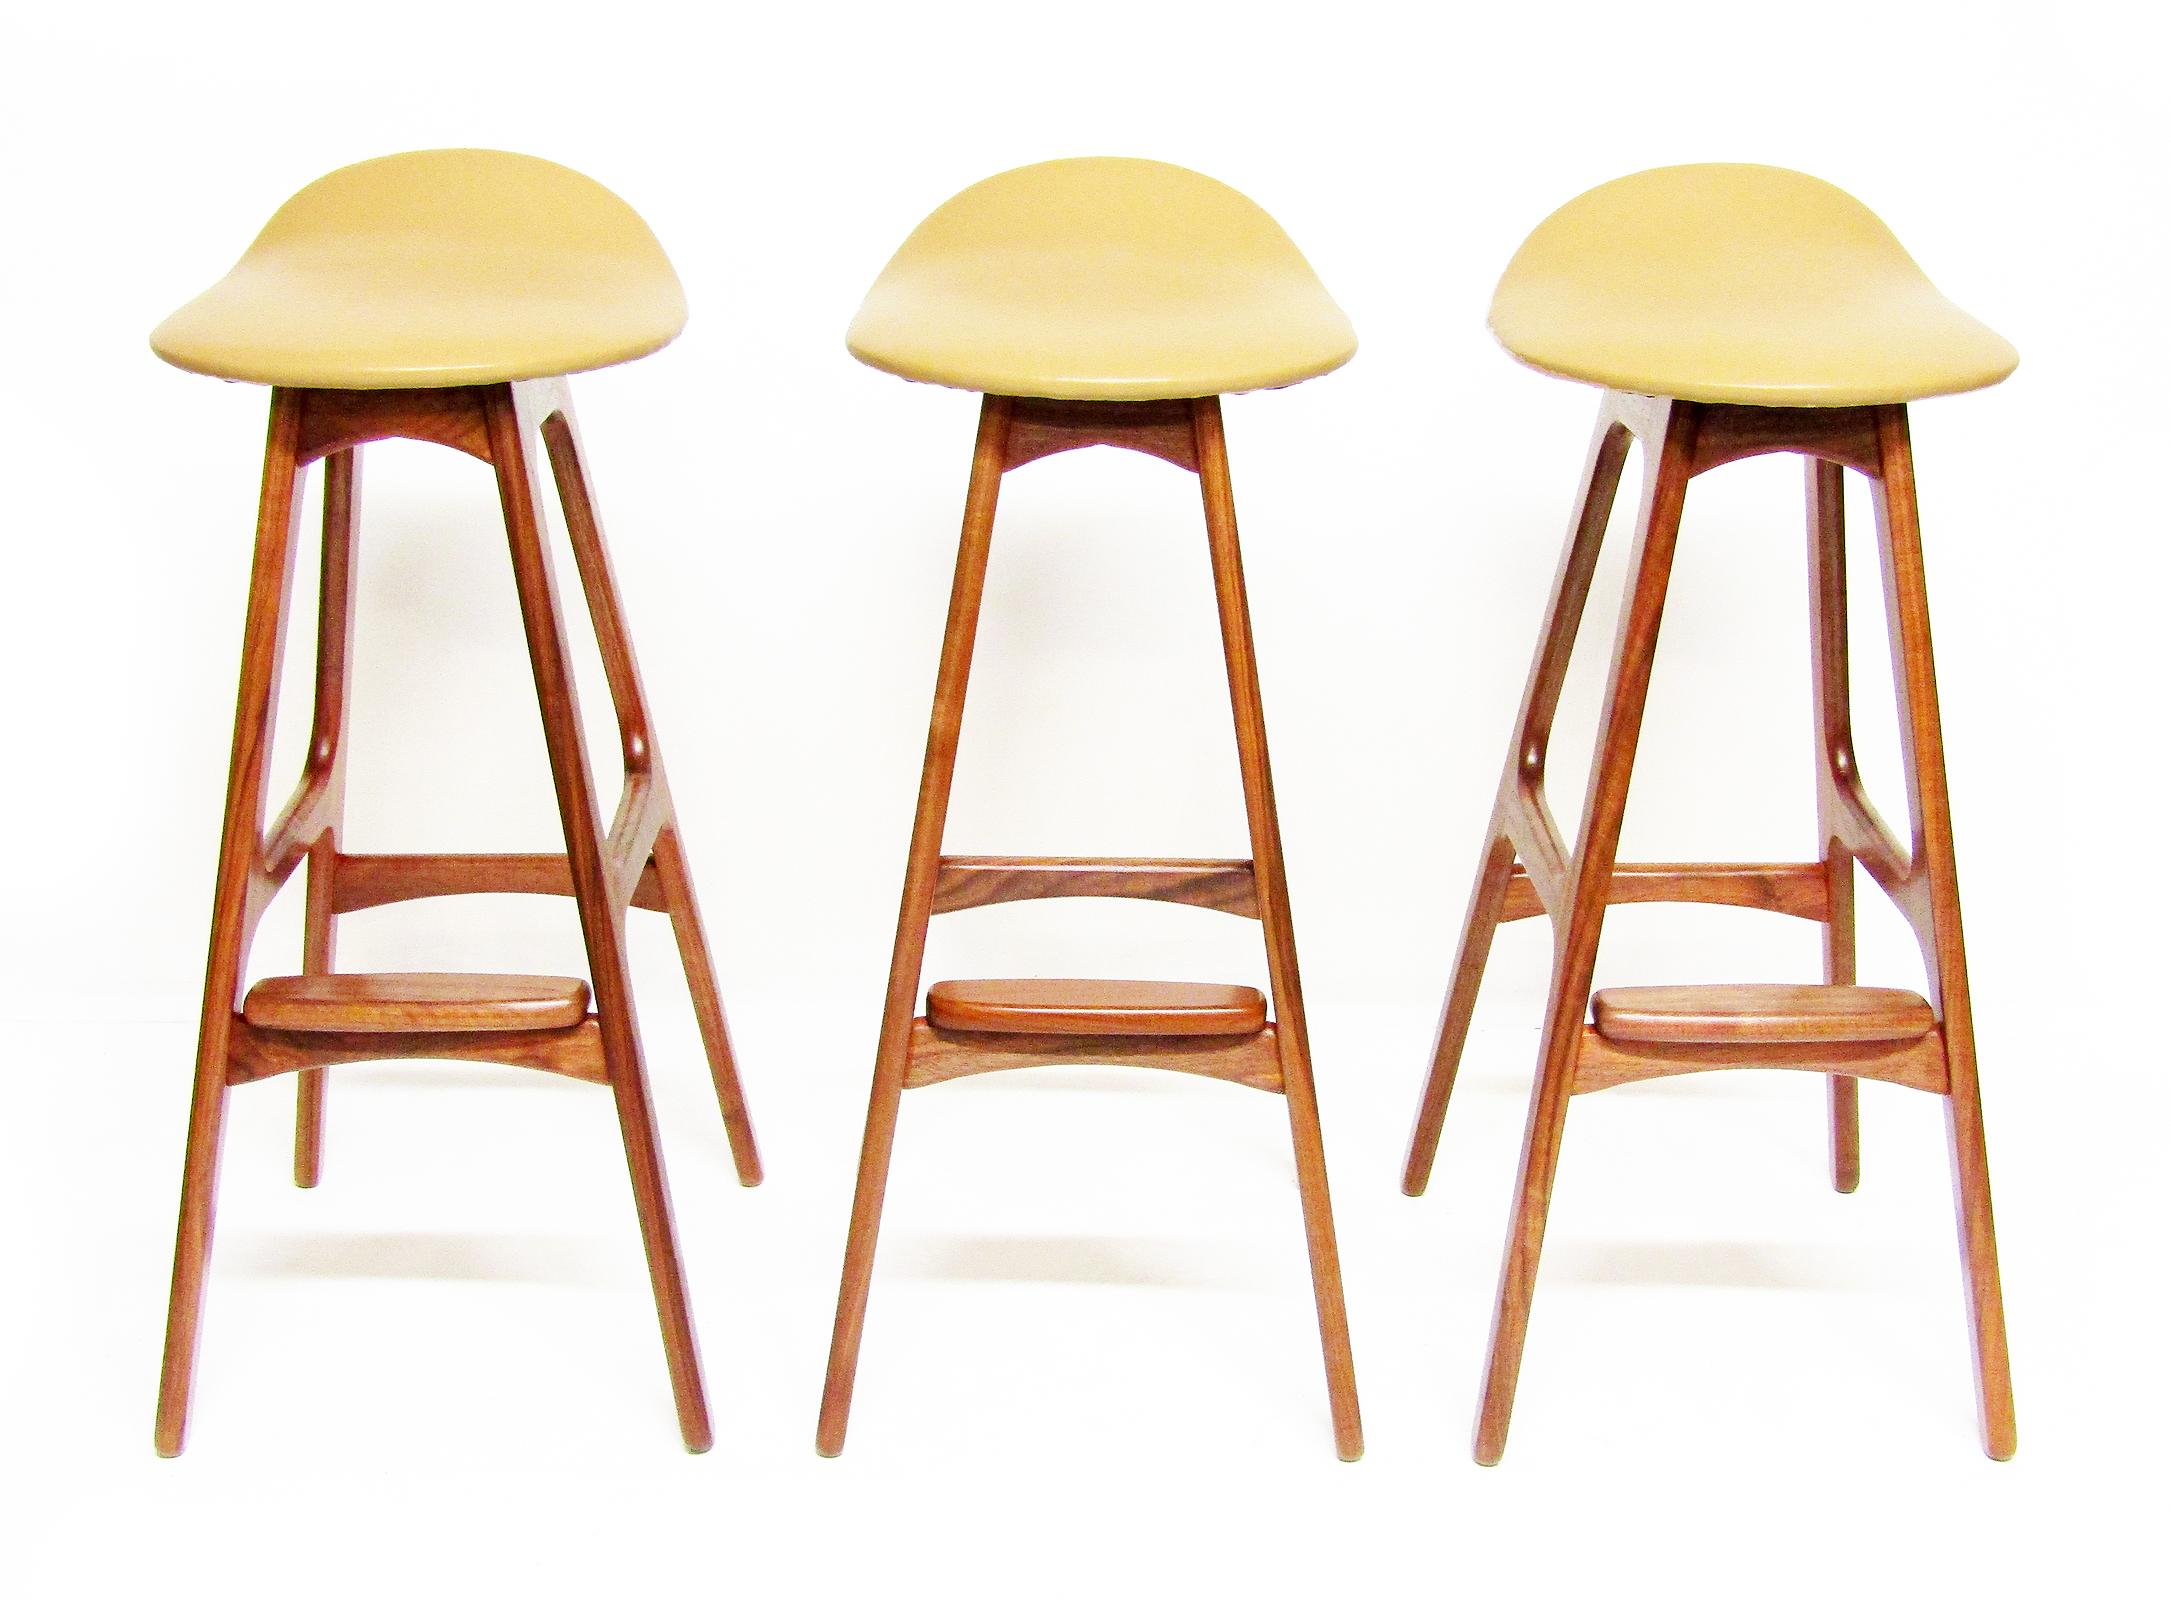 A set of three OD-61 bar stools, designed by Erik Buch for Oddense Møbelfabrik.

In rosewood and tan leather, this 1960s set has been fully reconditioned throughout.

The footrest and unique saddle-style seat provides stability and comfort.

Among